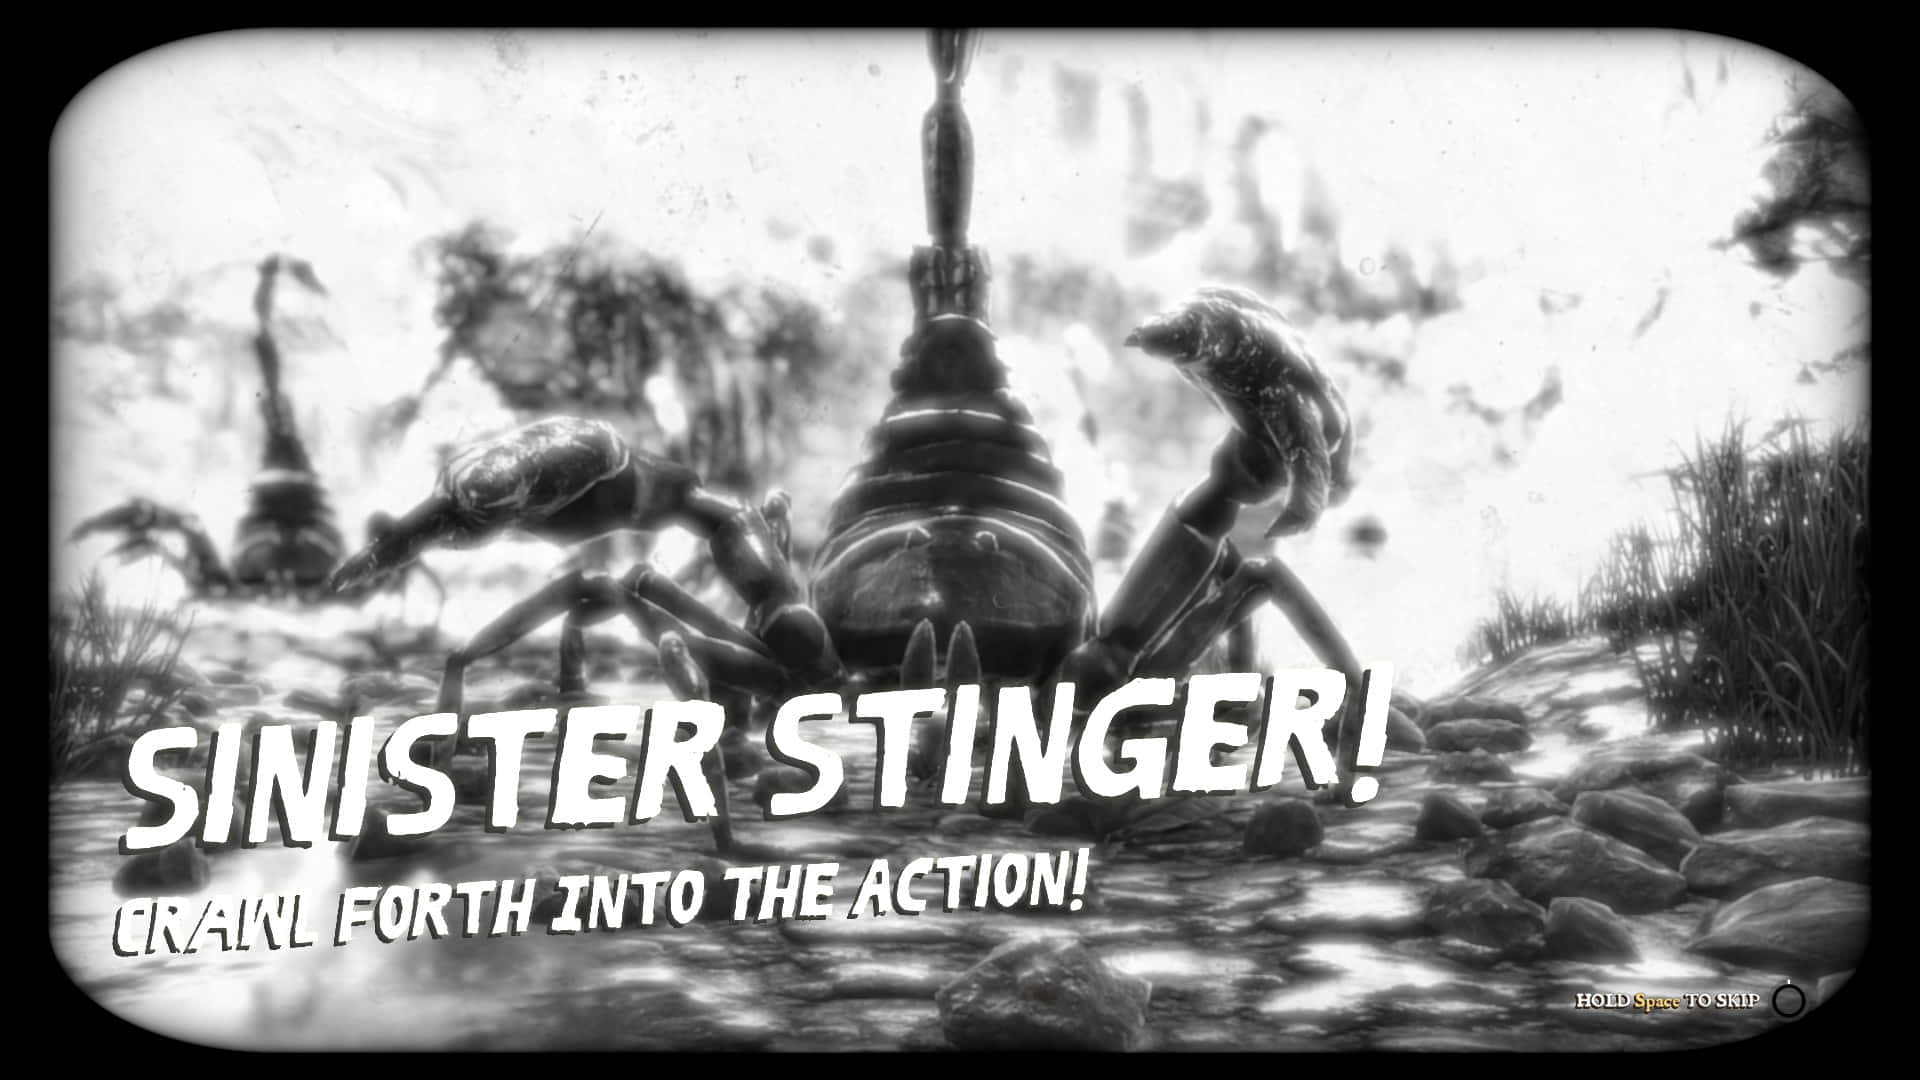 Sinister Stinger - A Swarm Of Spiders